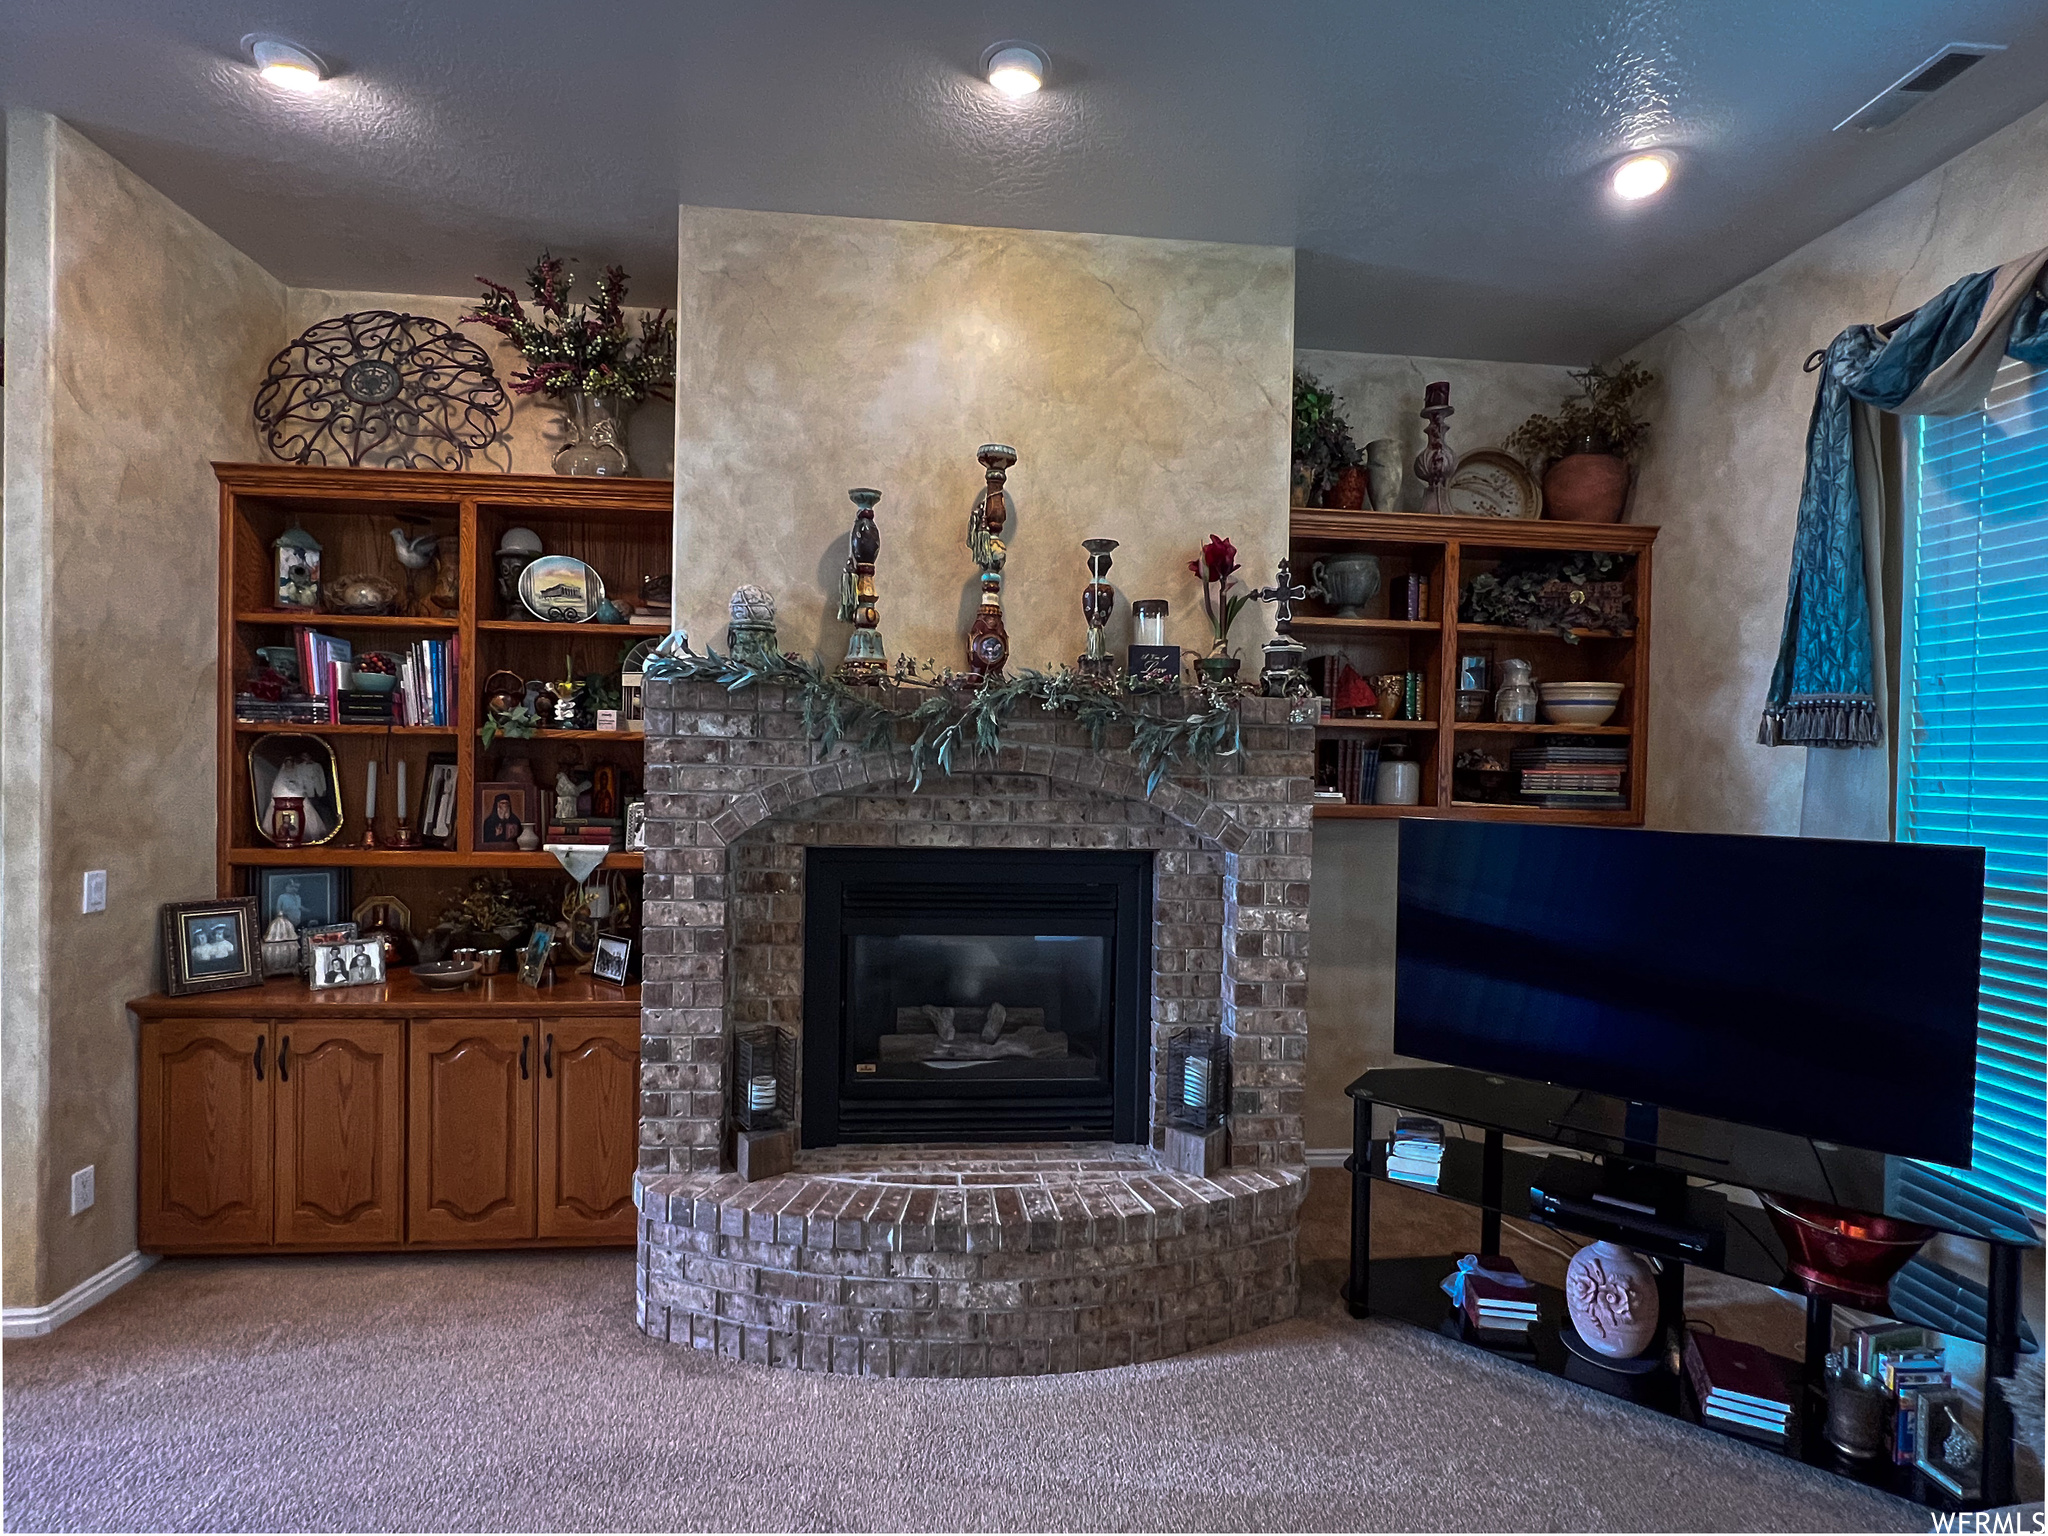 Living room with a fireplace, and carpet